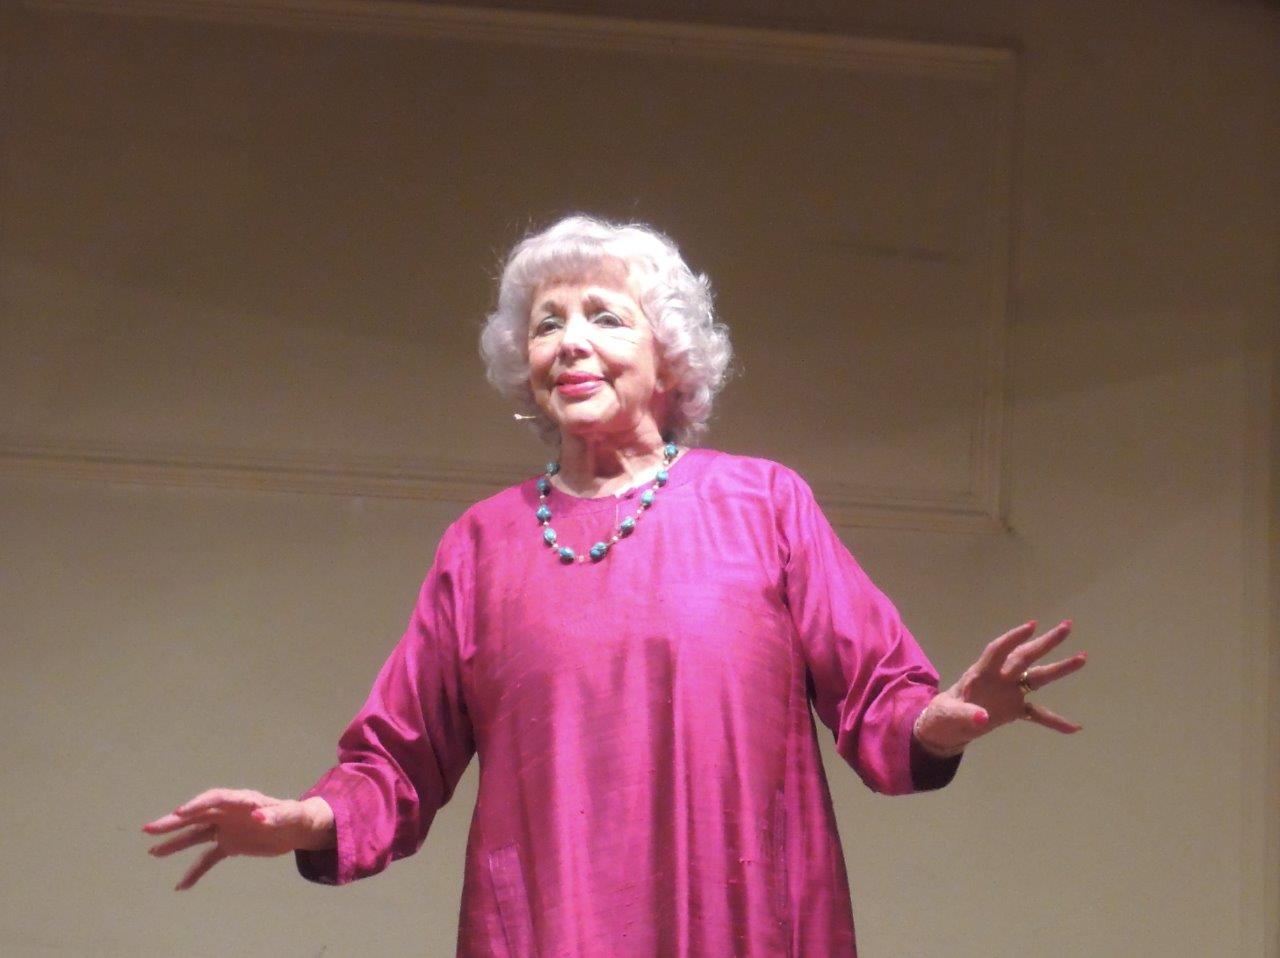 A review of Thelma Ruby’s one-woman show as a gift to the Spiro Ark